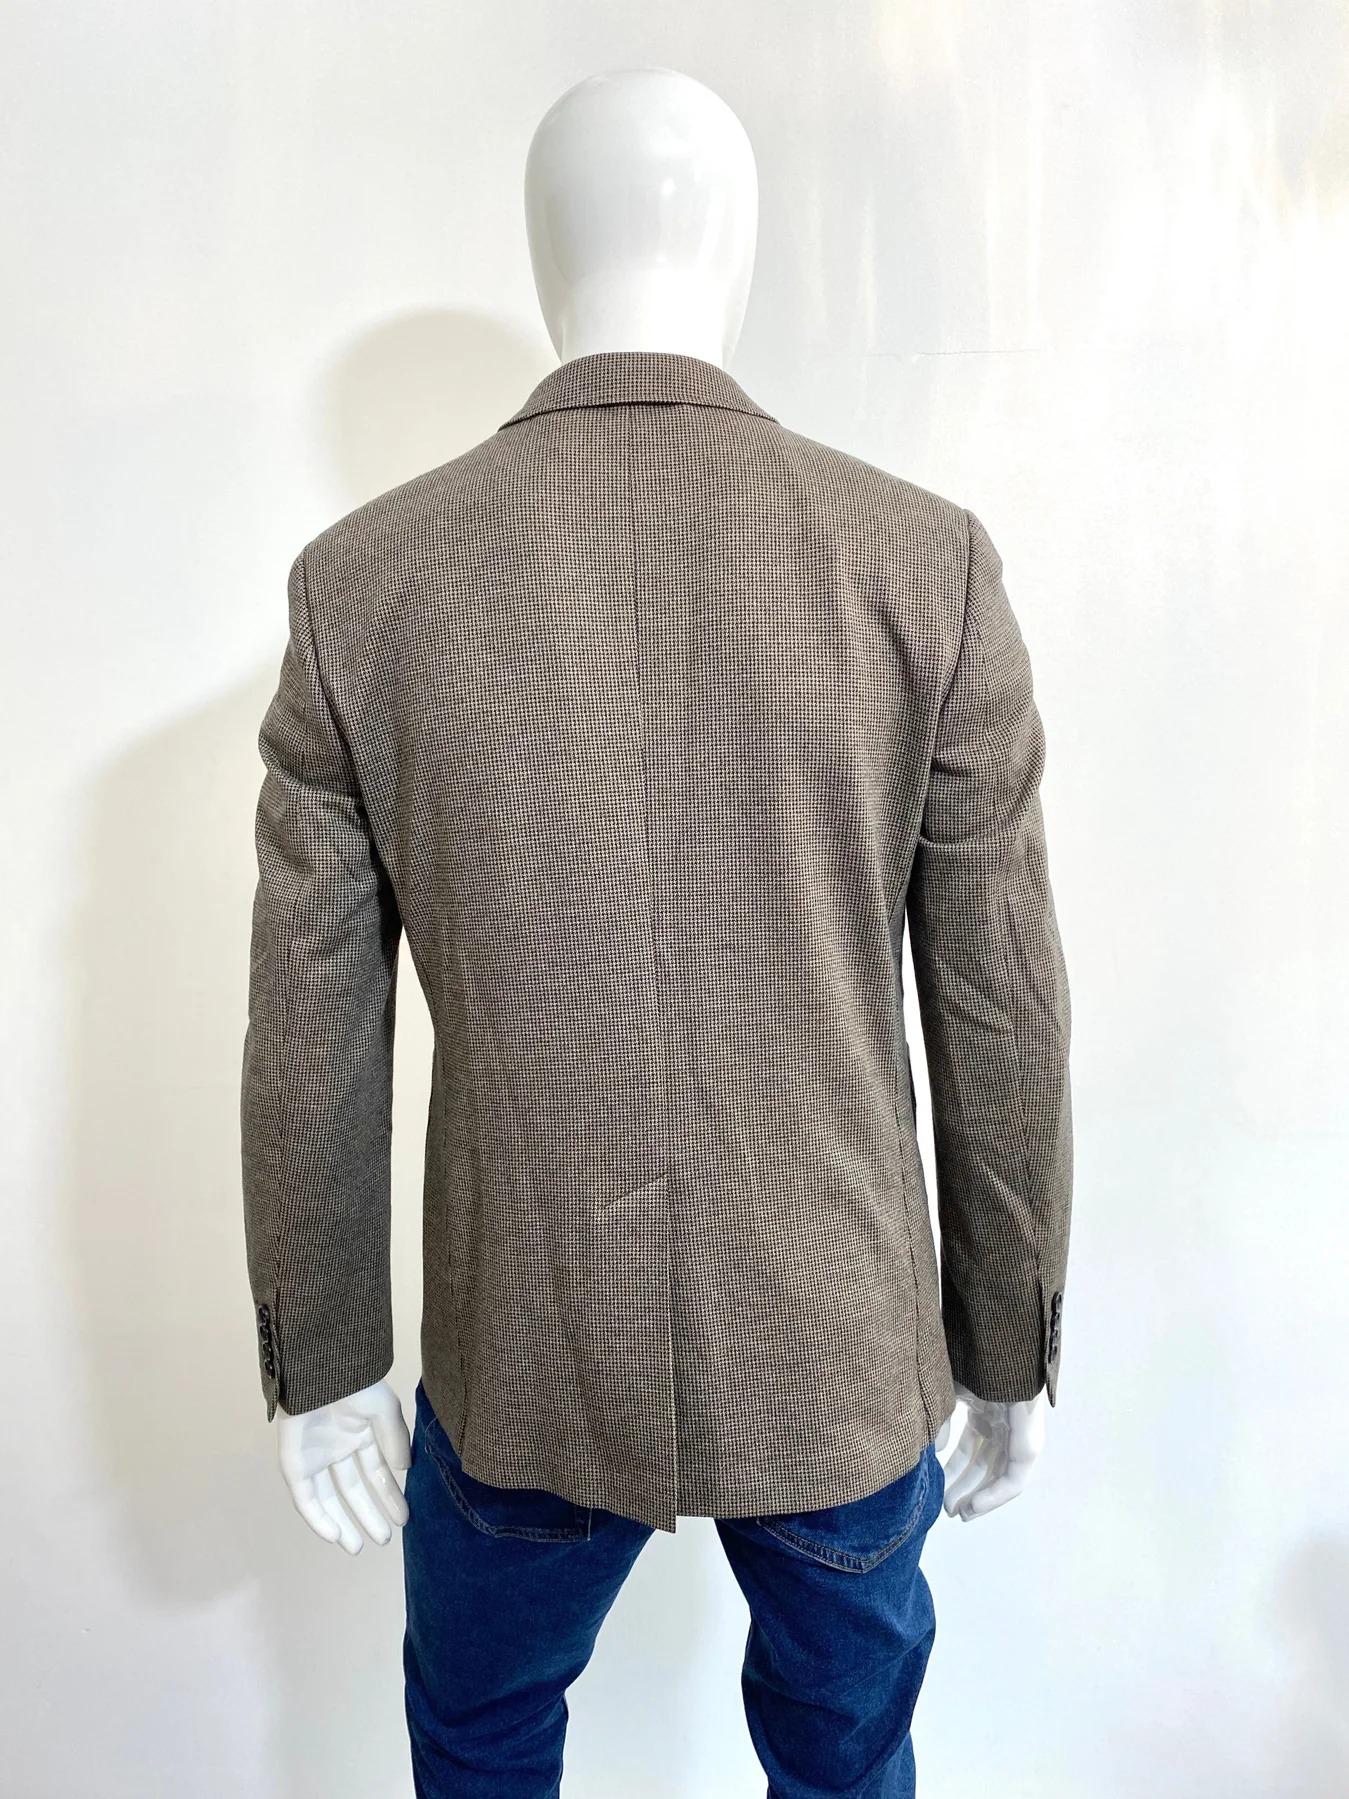 Burberry Houndstooth Jacket

55% Cotton and 45% Wool. Single breasted in brown and beige tones, fully lined. Button up closure and cuffs with signature logo buttons. Two open hip pockets and a single chest pocket.

Additional information:
Size –